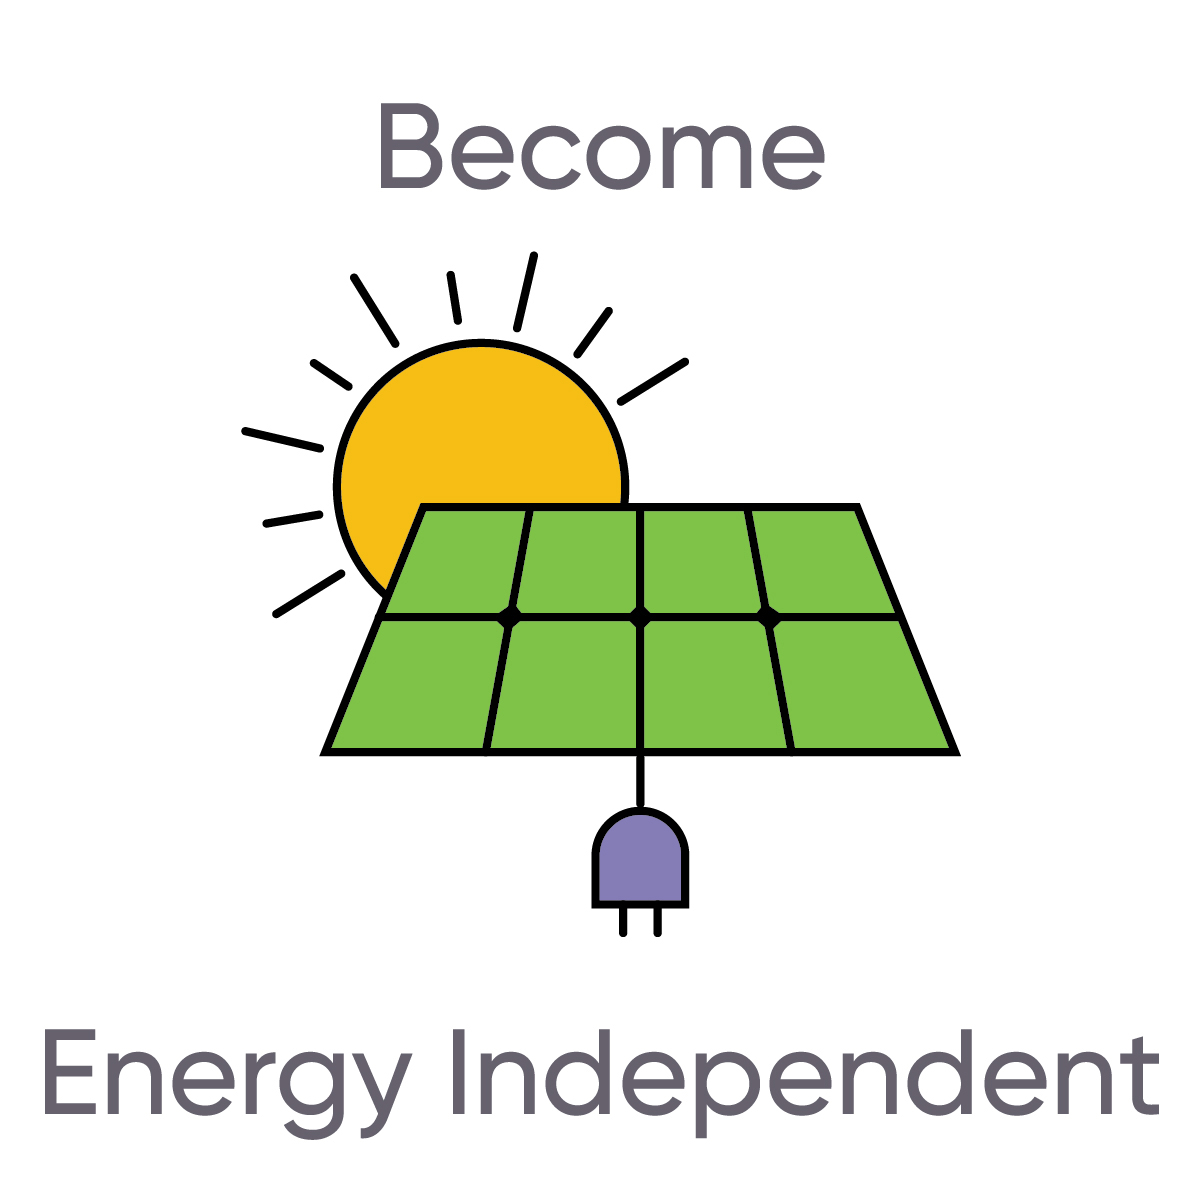 Become energy independent